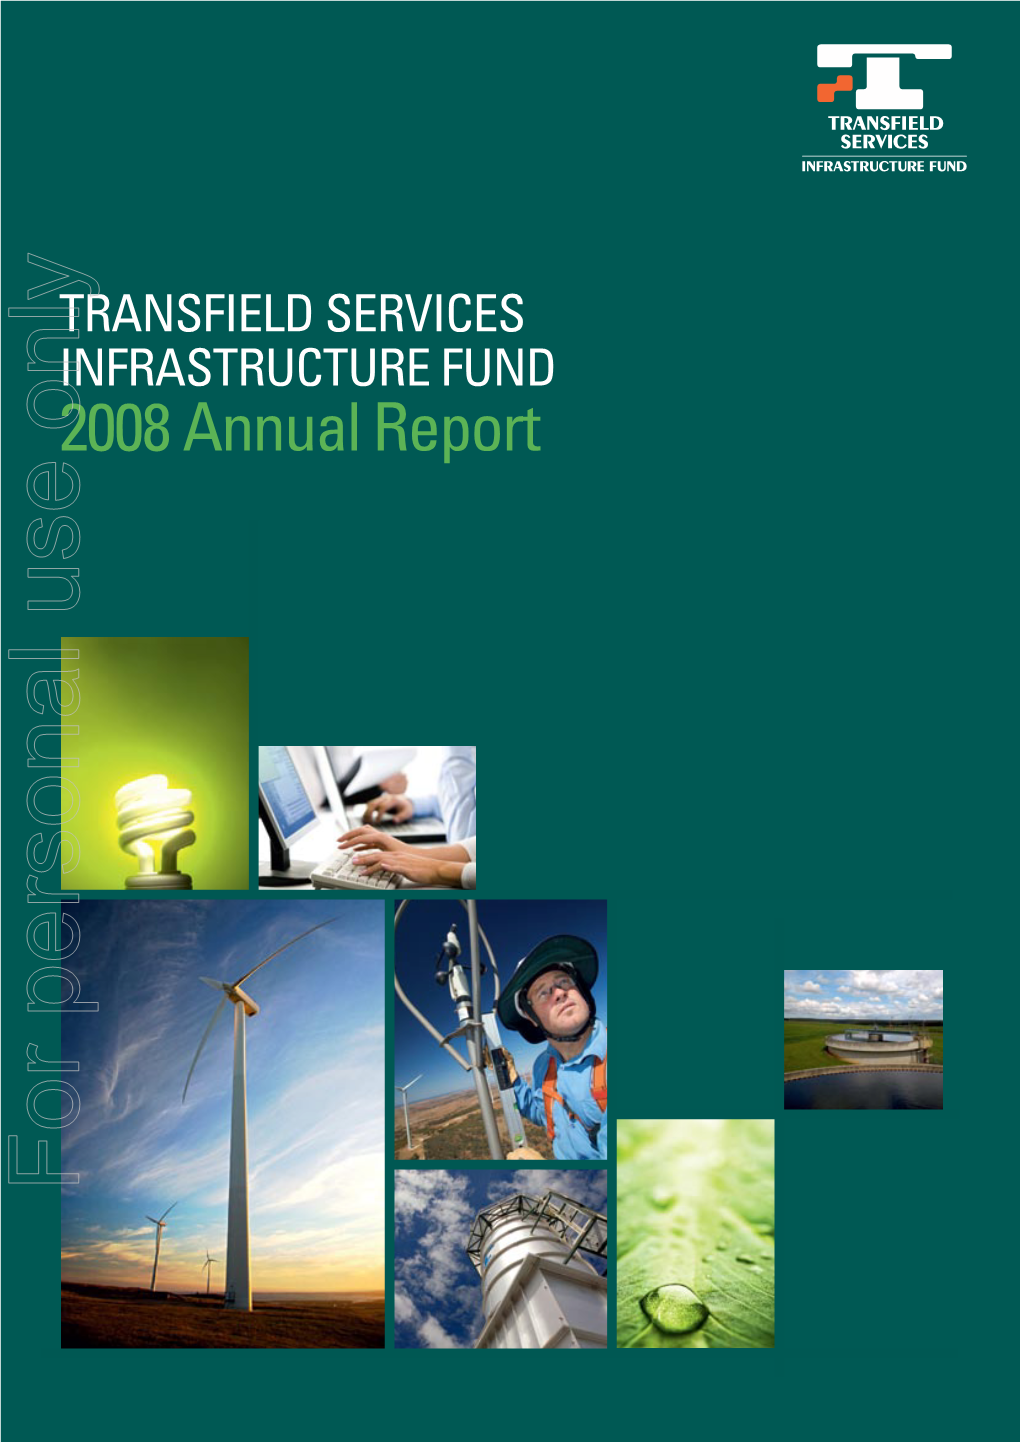 For Personal Use Only Use Personal for Transfield Services Infrastructure Fund Has High Quality Essential Infrastructure Assets with Substantially Contracted Revenues